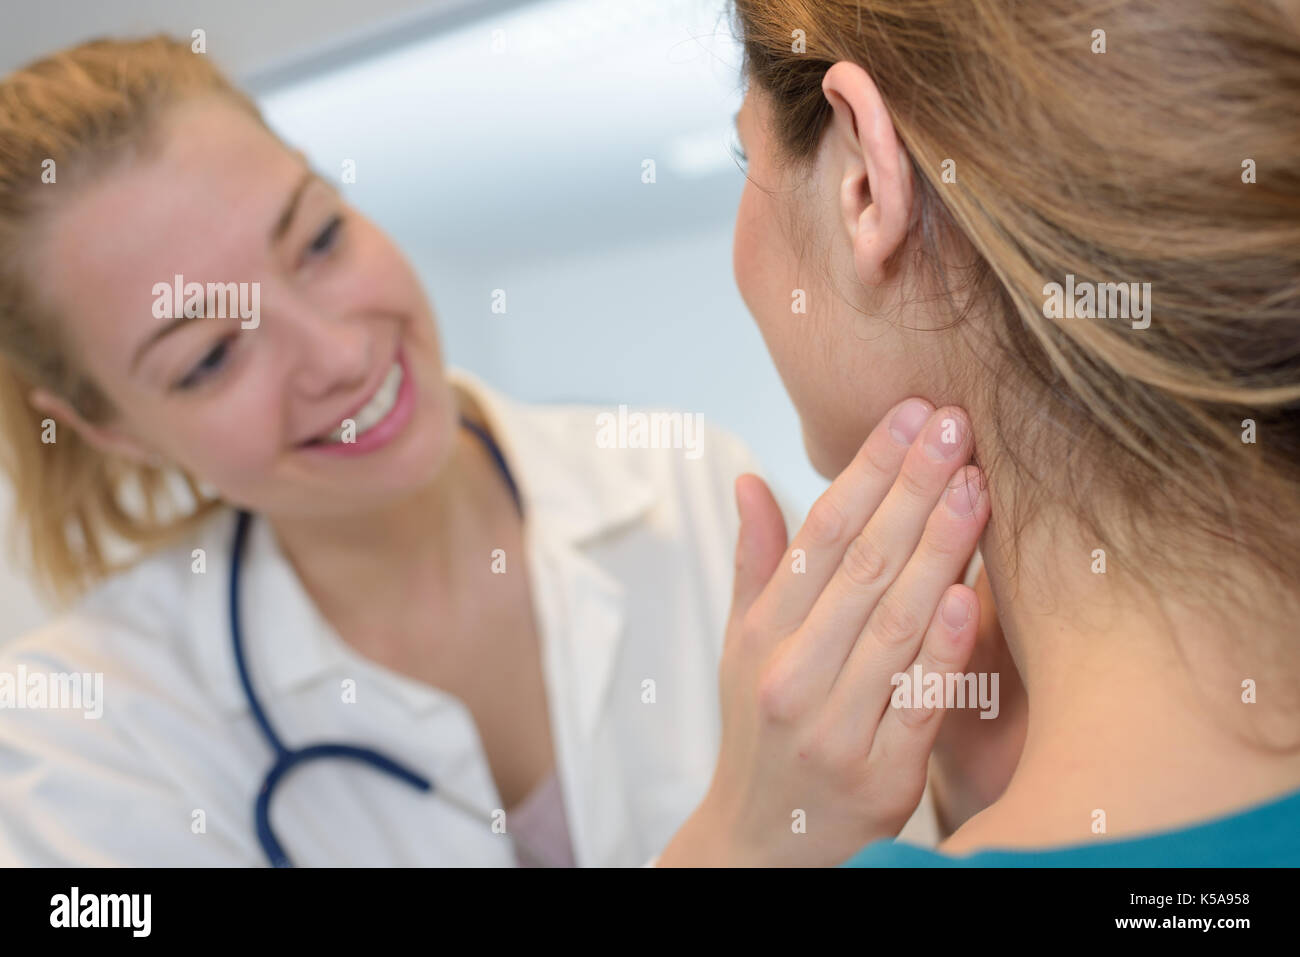 doctor checking the lymph nodes size of her patient Stock Photo